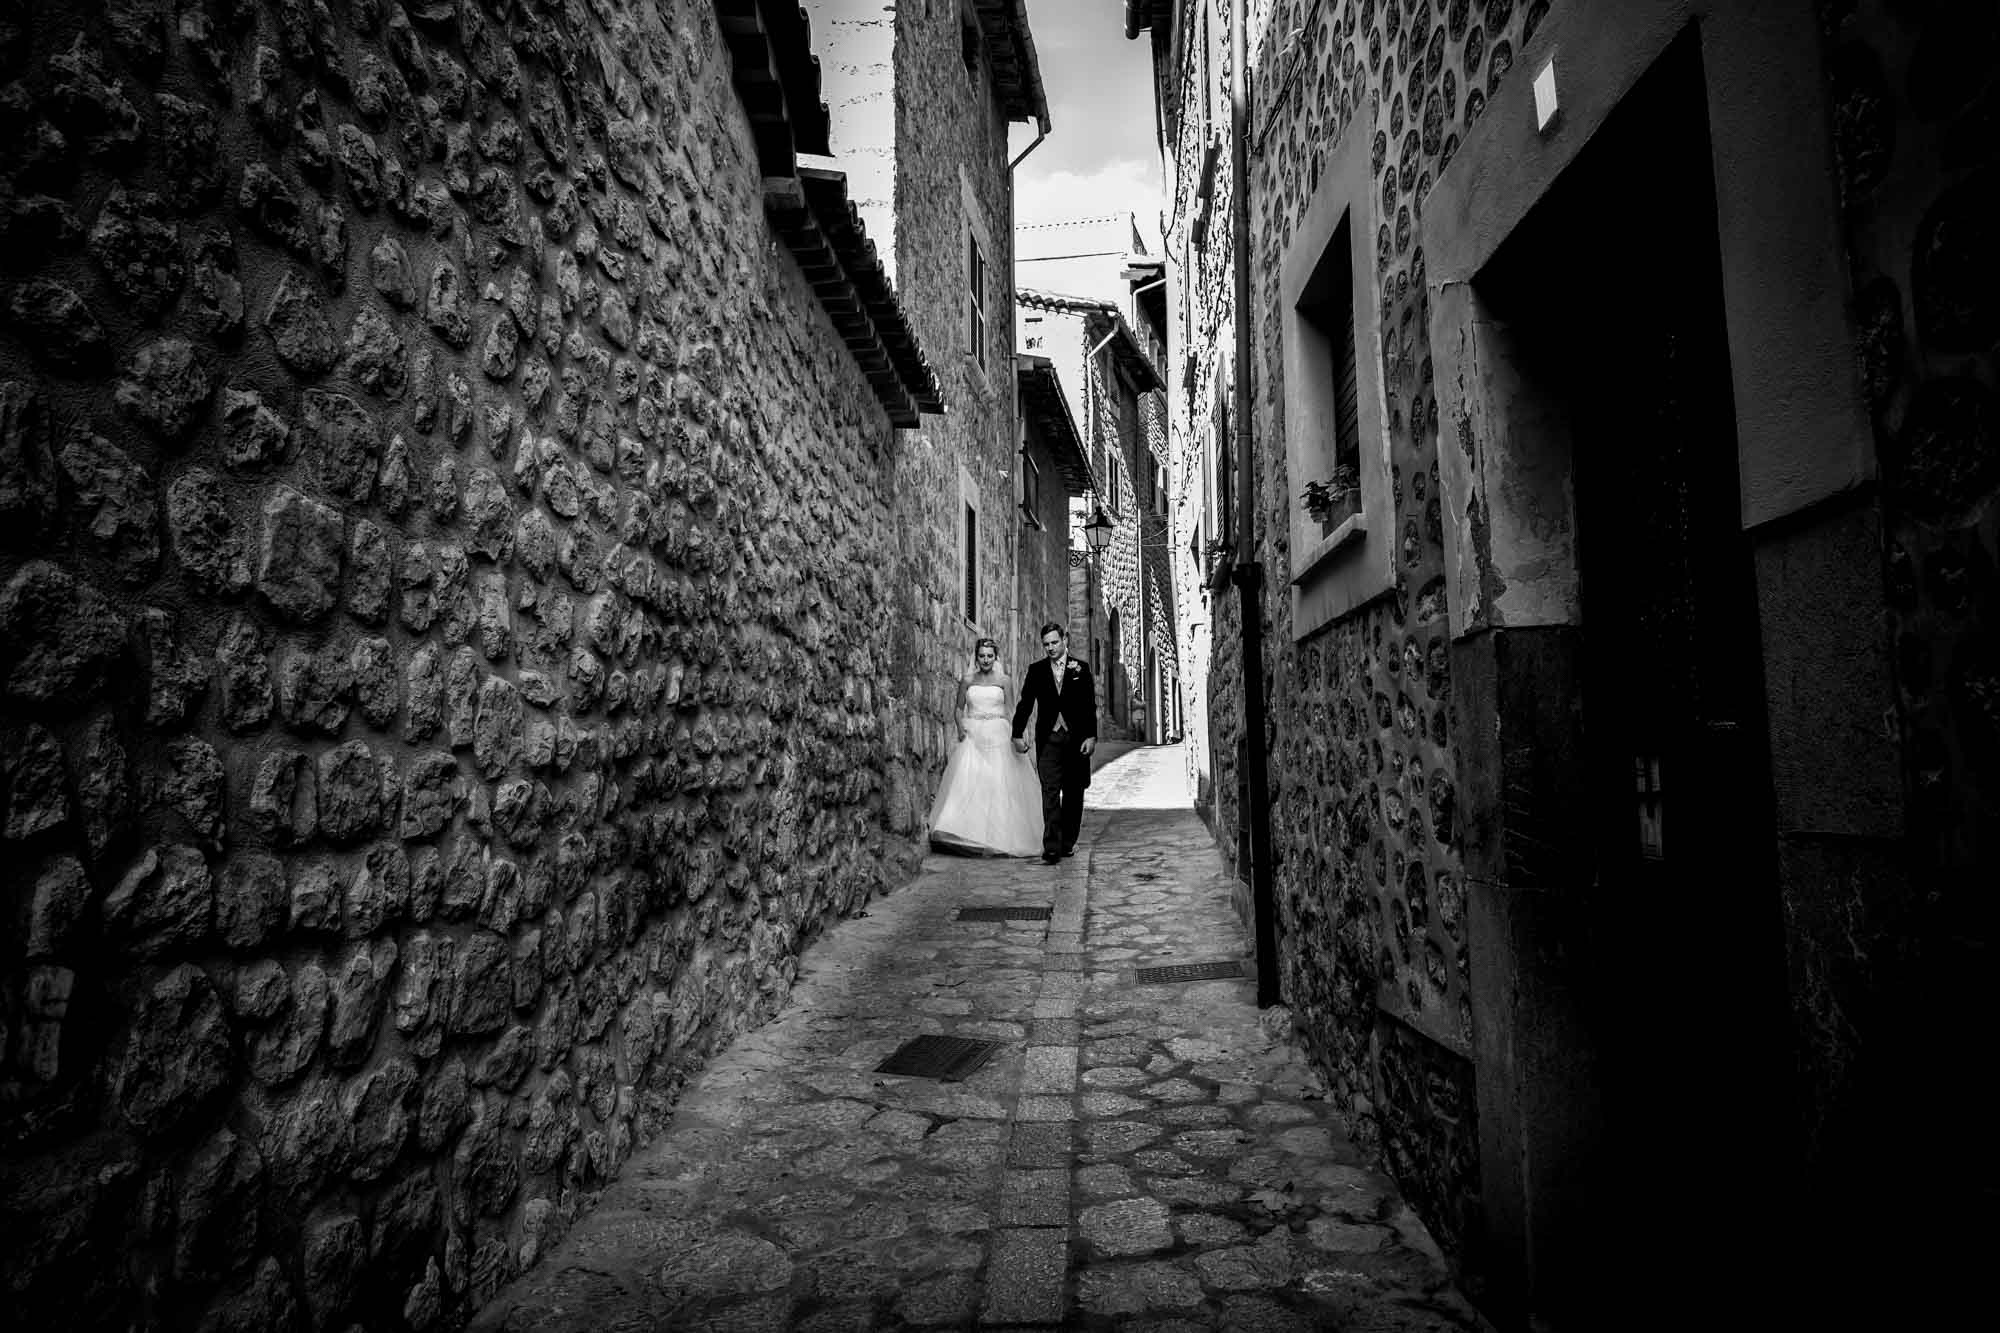 The bride and groom walk down the narrow streets of Fornalutx in Mallorca